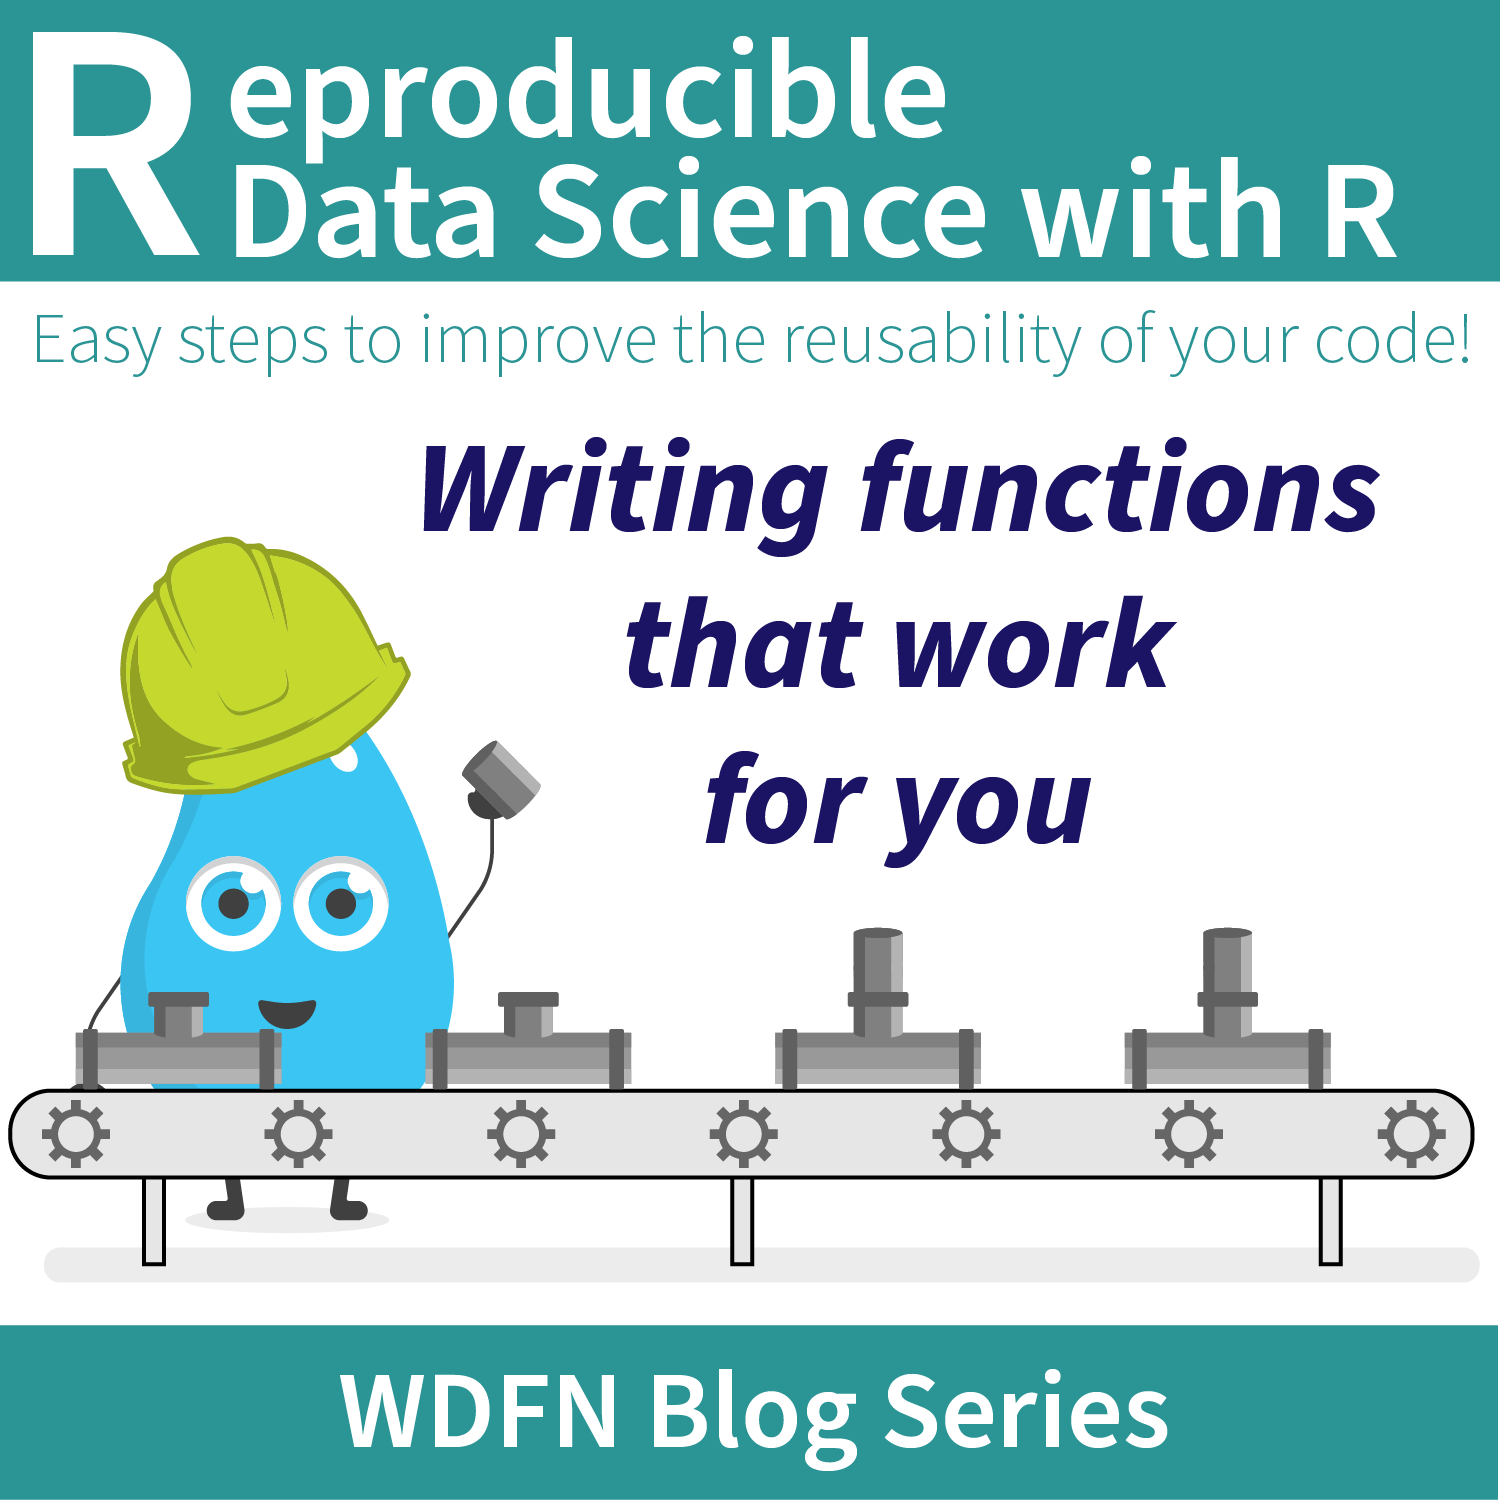 Reproducible Data Science in R: Writing functions that work for you